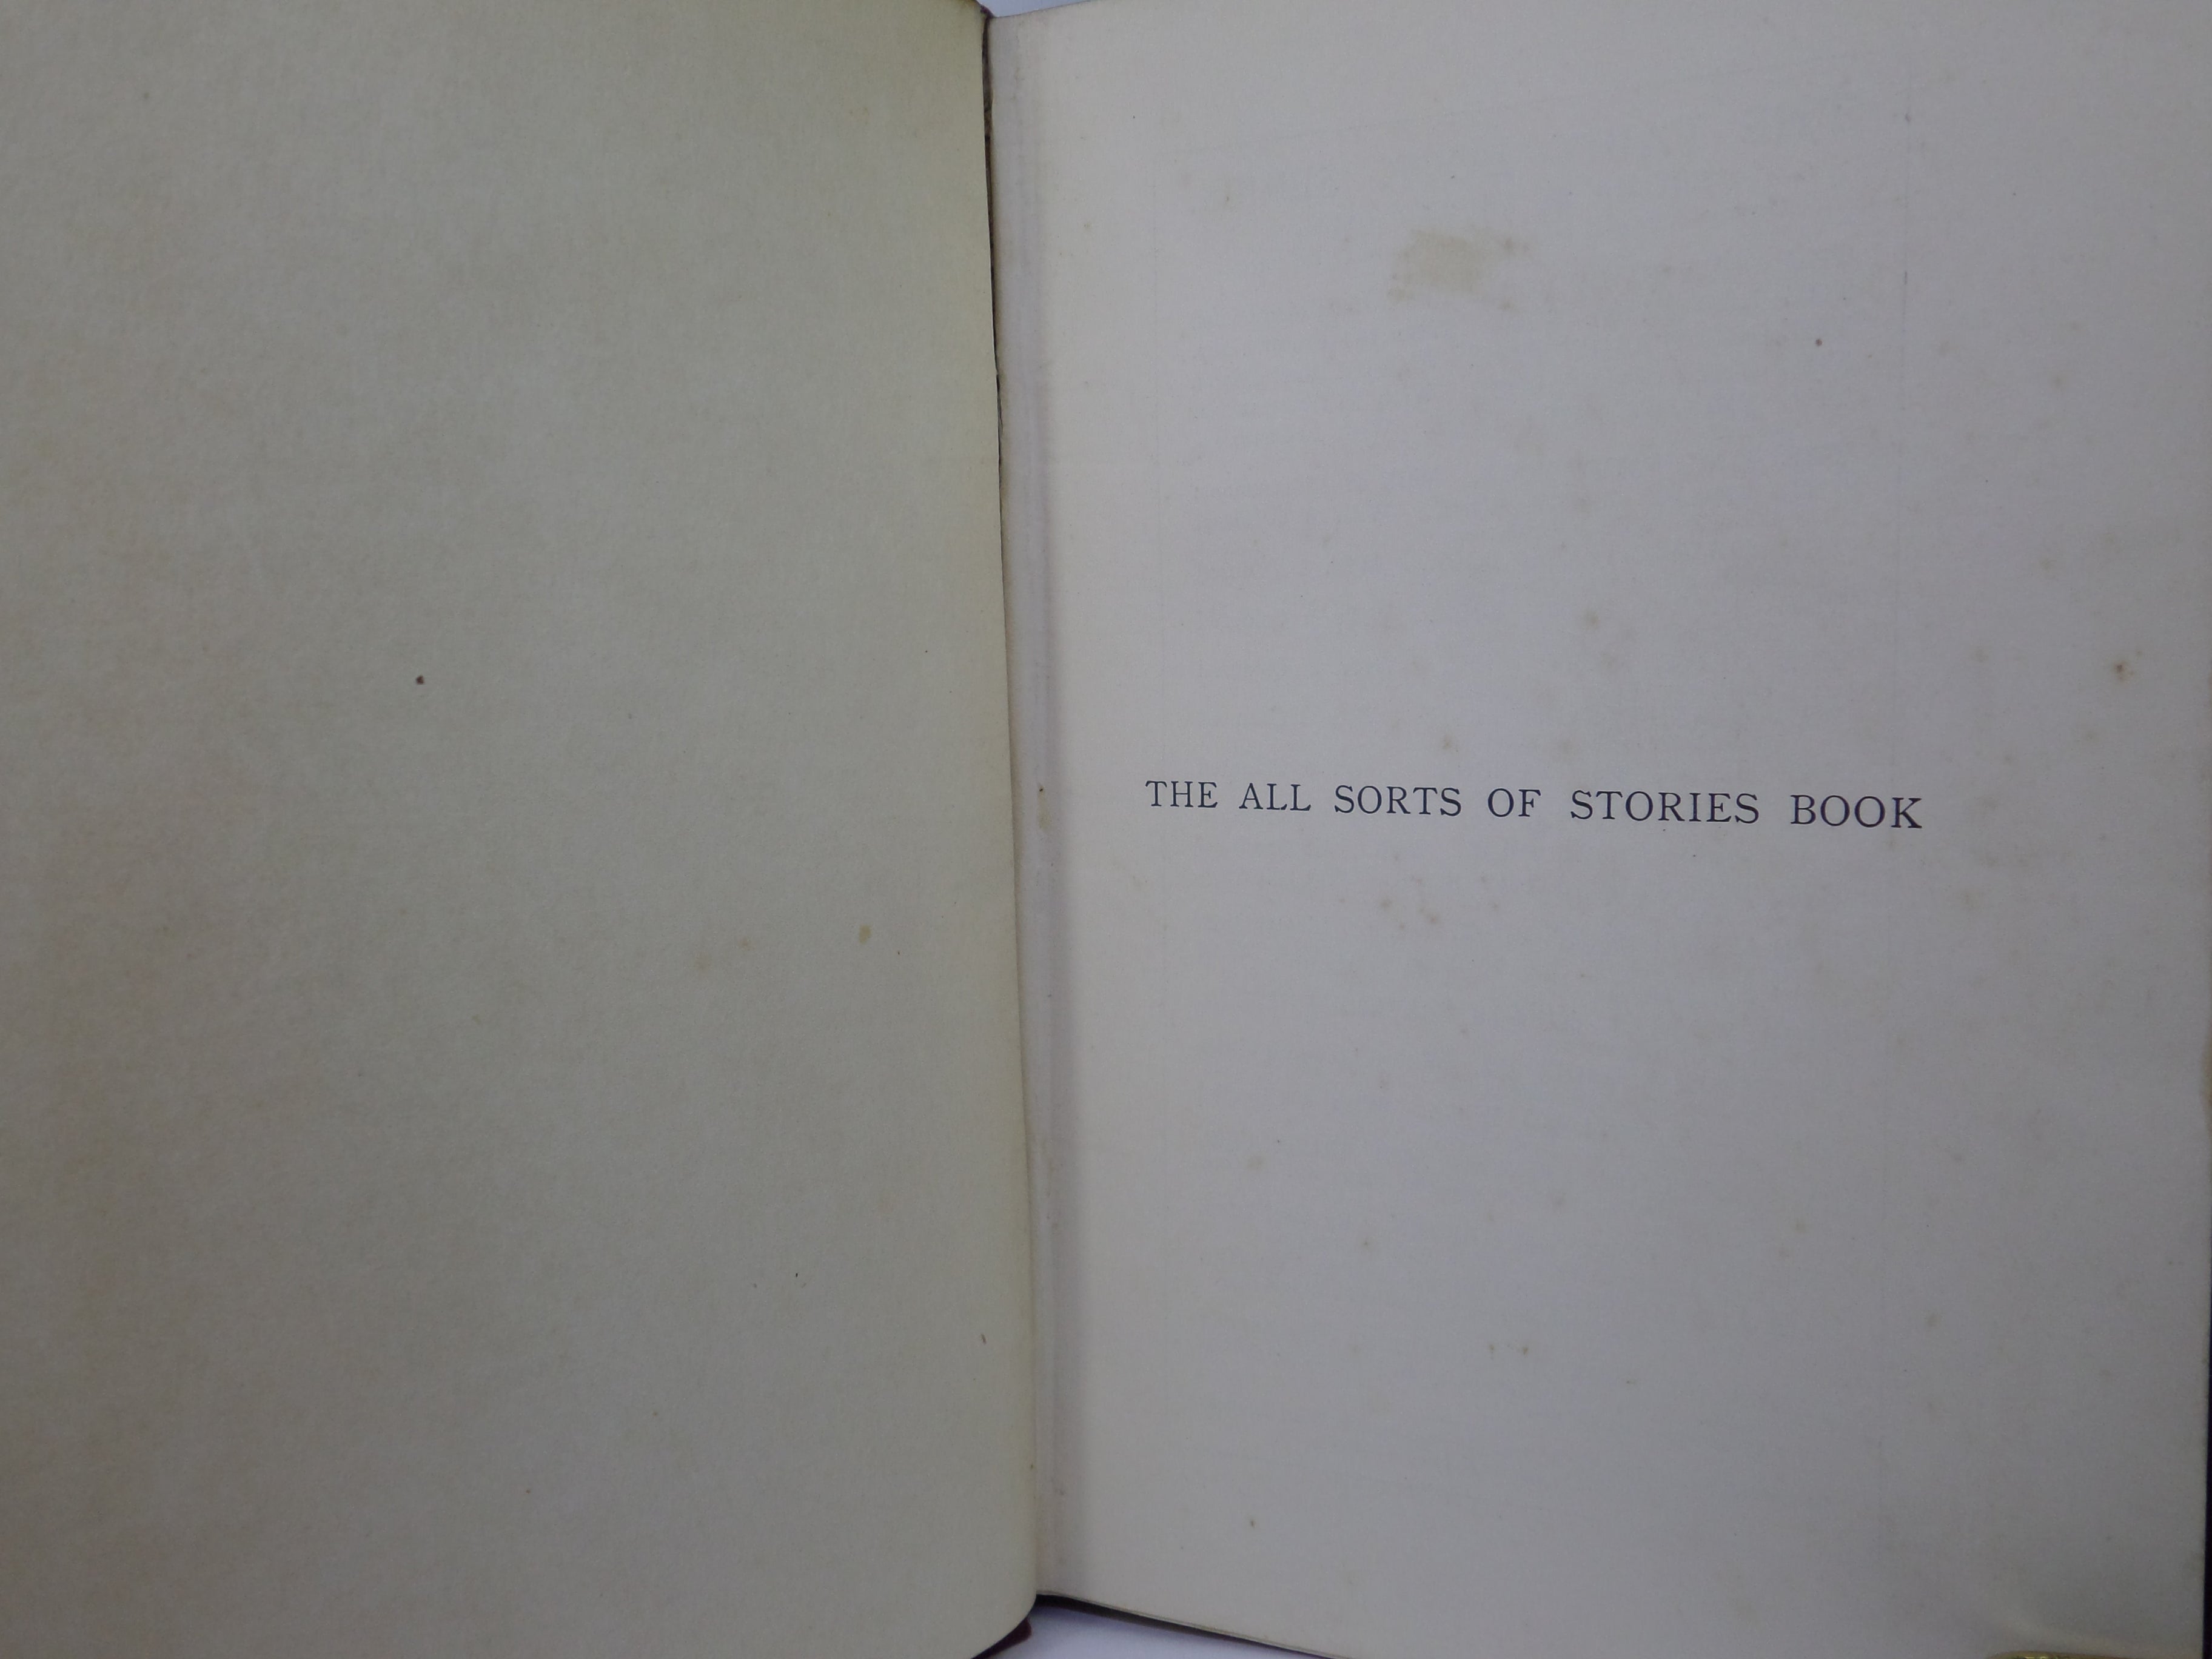 THE ALL SORTS OF STORIES BOOK BY MRS LANG, EDITED BY ANDREW LANG 1911 FIRST EDITION